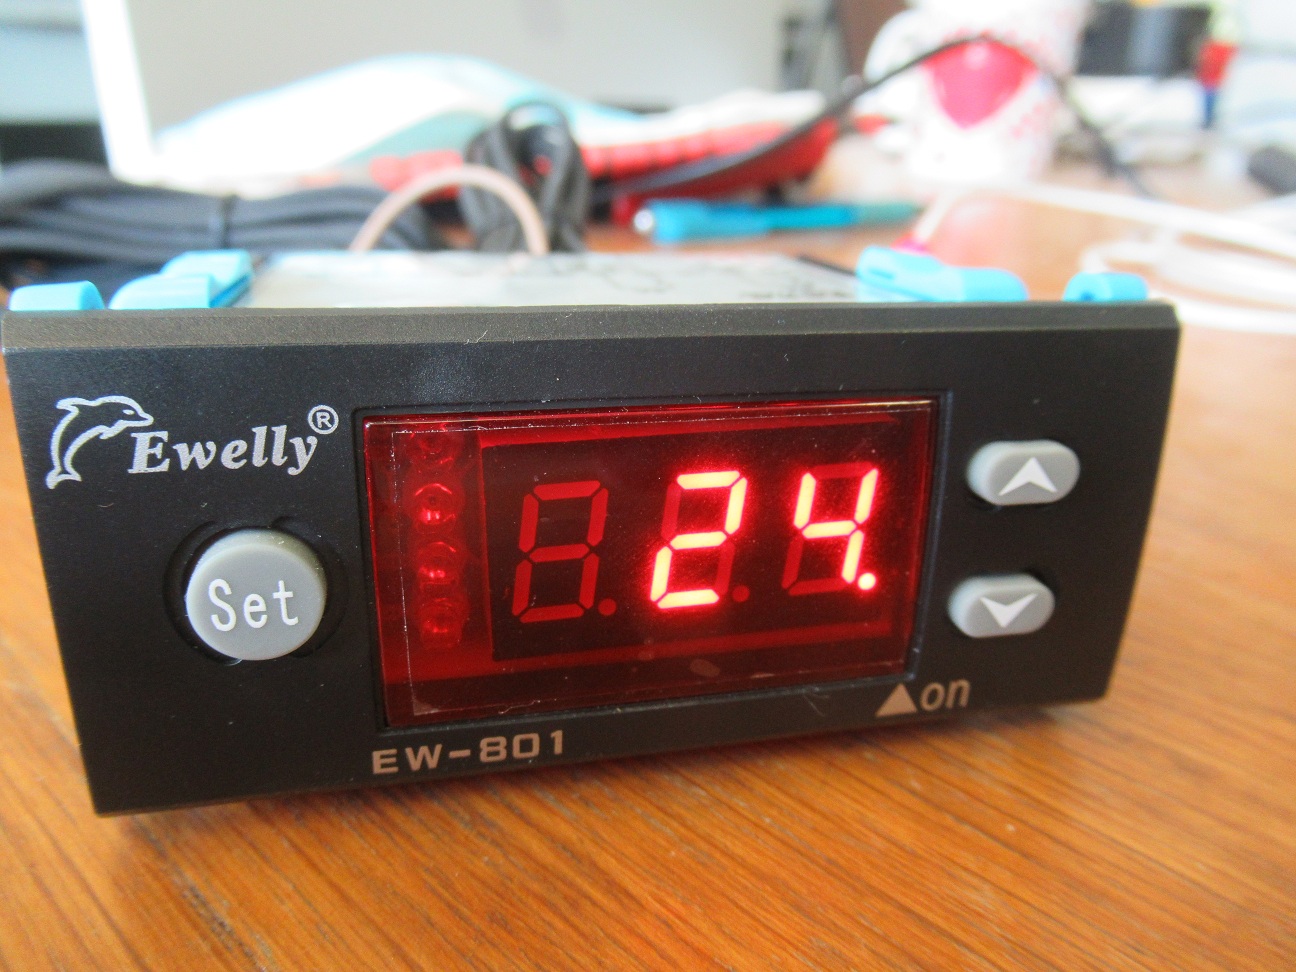 Ewelly EW-M801AH  temperature controller review and manual